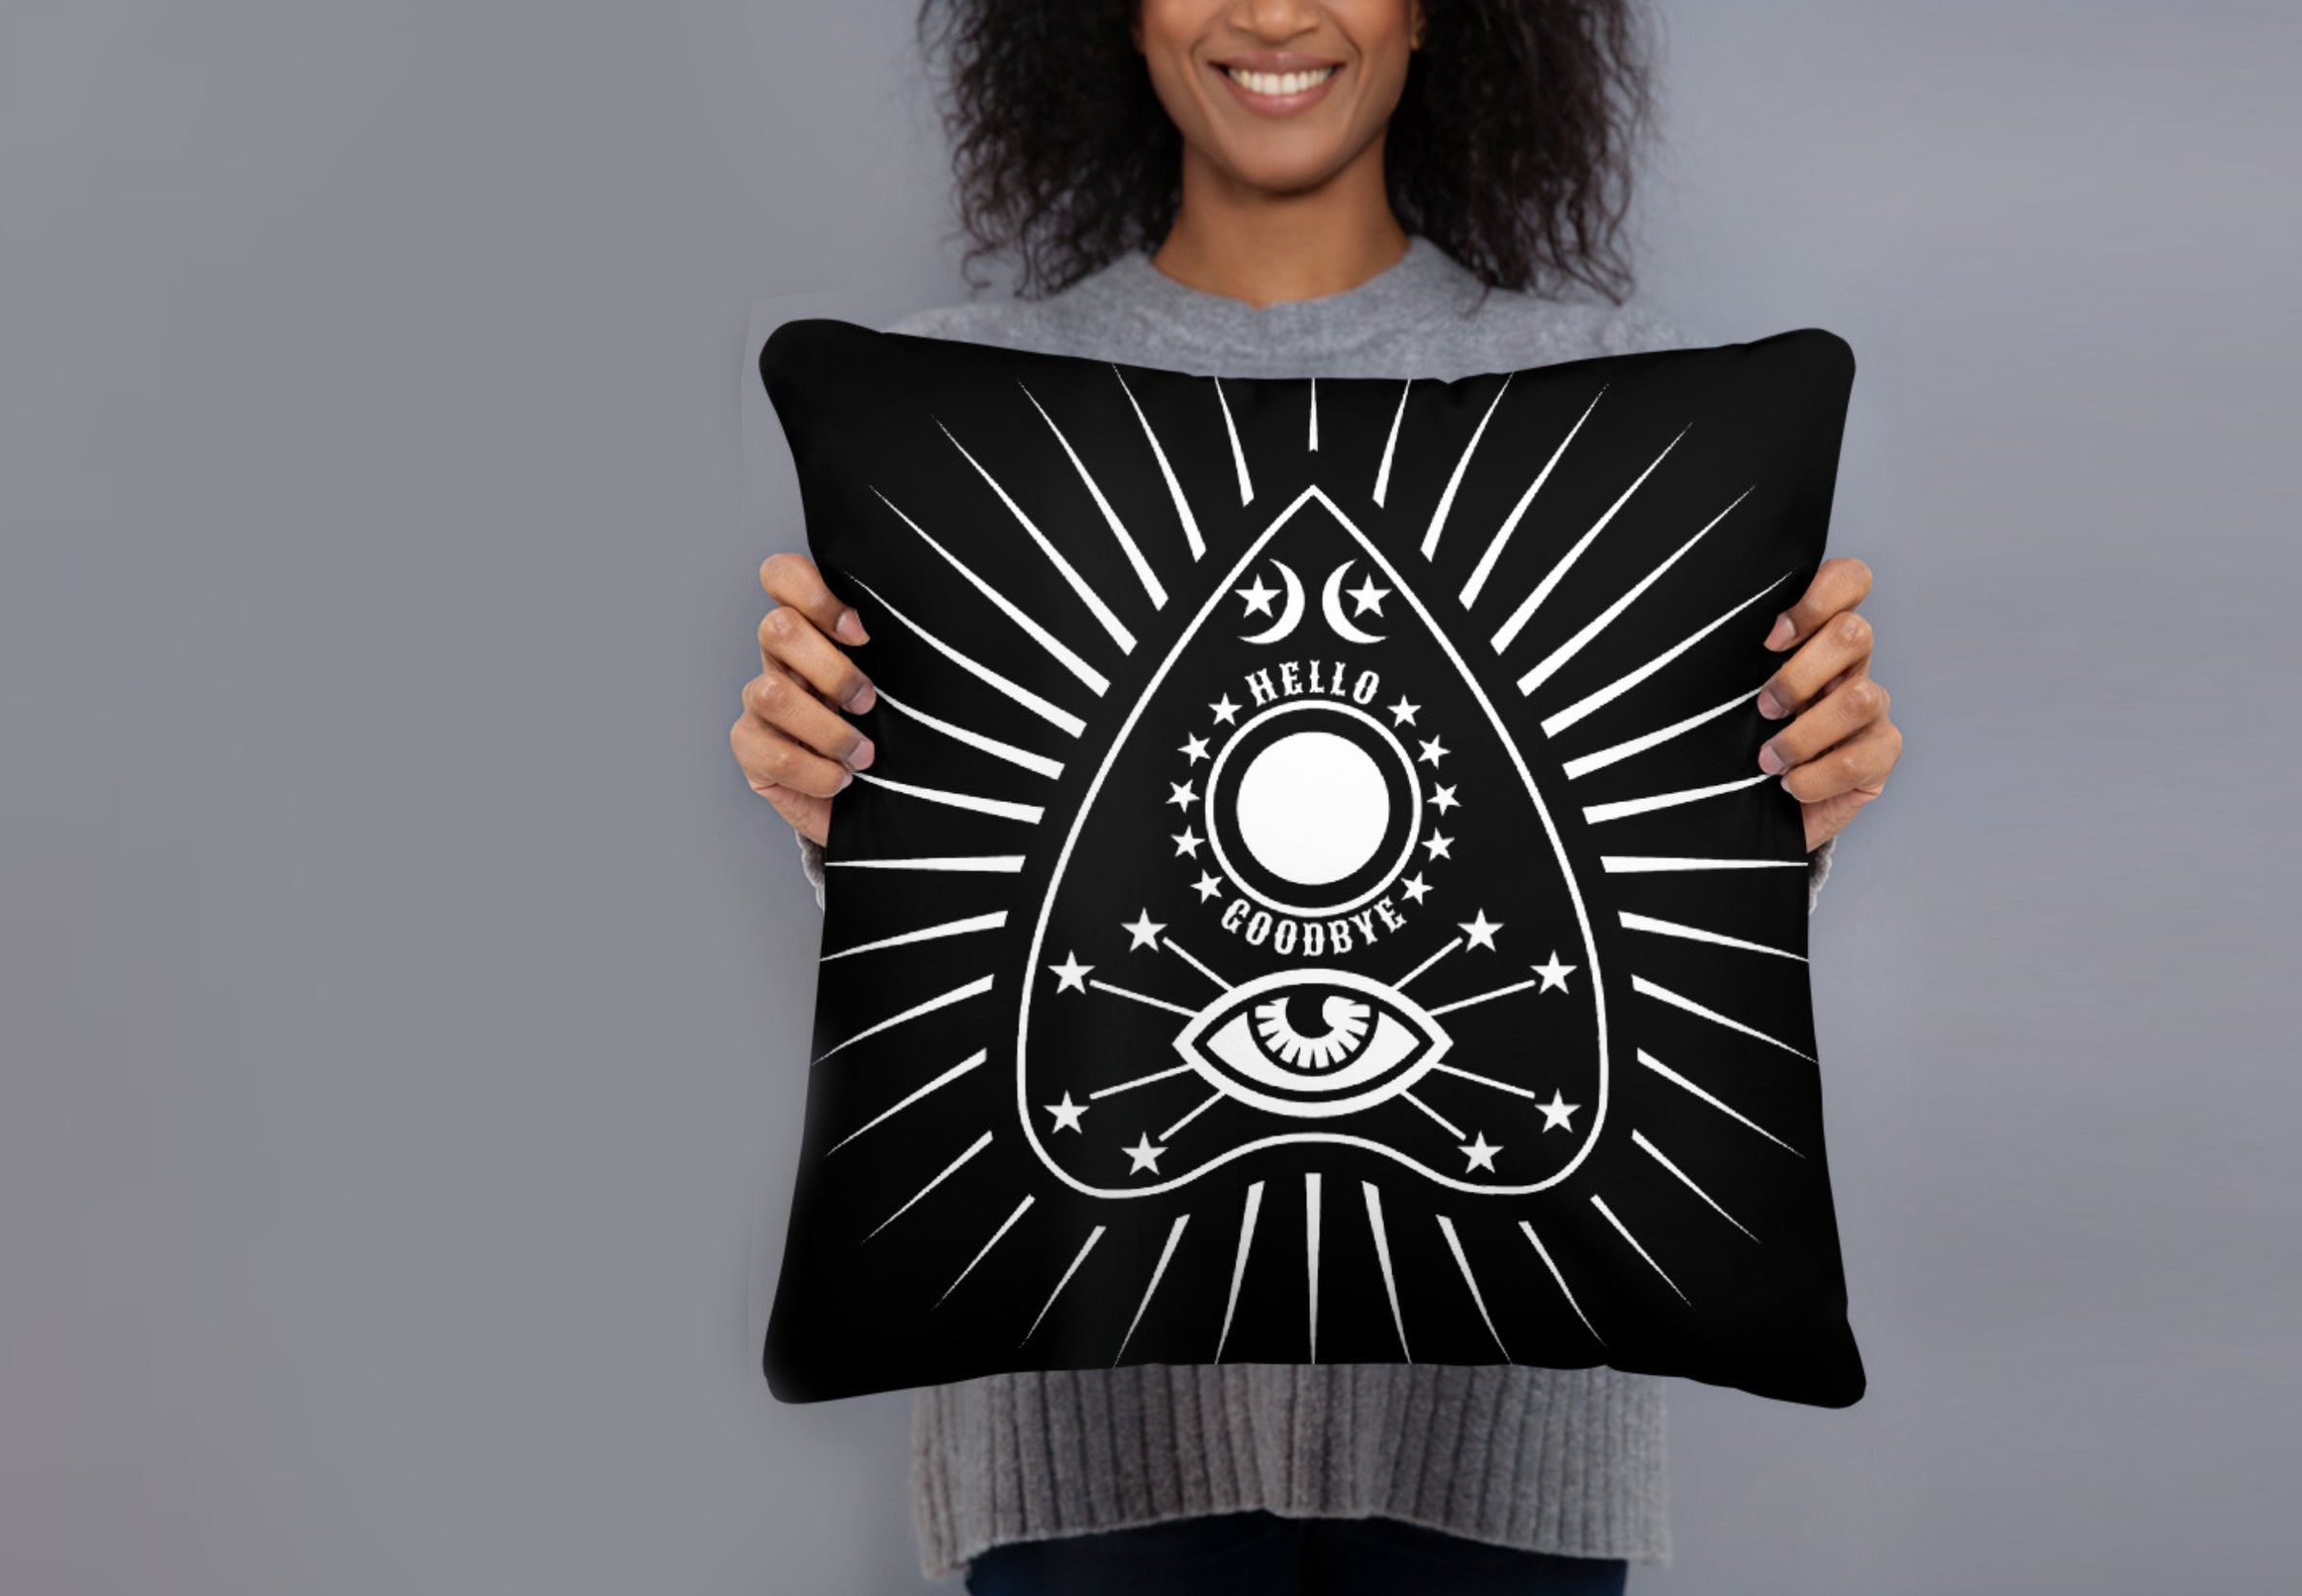 A smiling black woman holds a throw pillow in front of her. The pillow is black with a white communication board planchette design with lines radiating out from it. She stands against a grey wall.